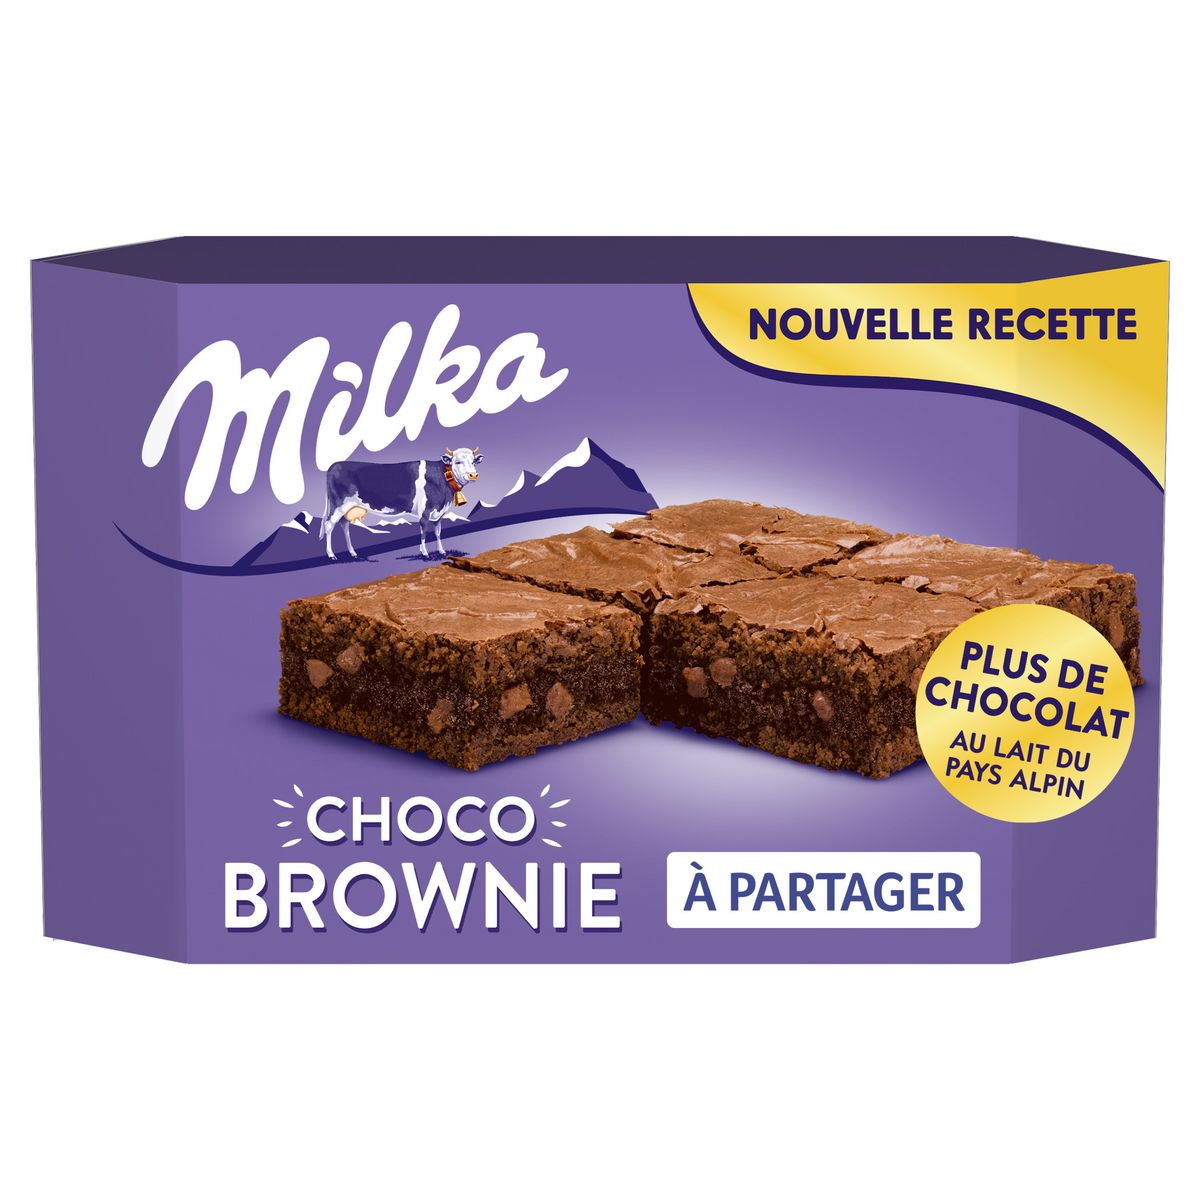 Tendres moelleux brownies à partager